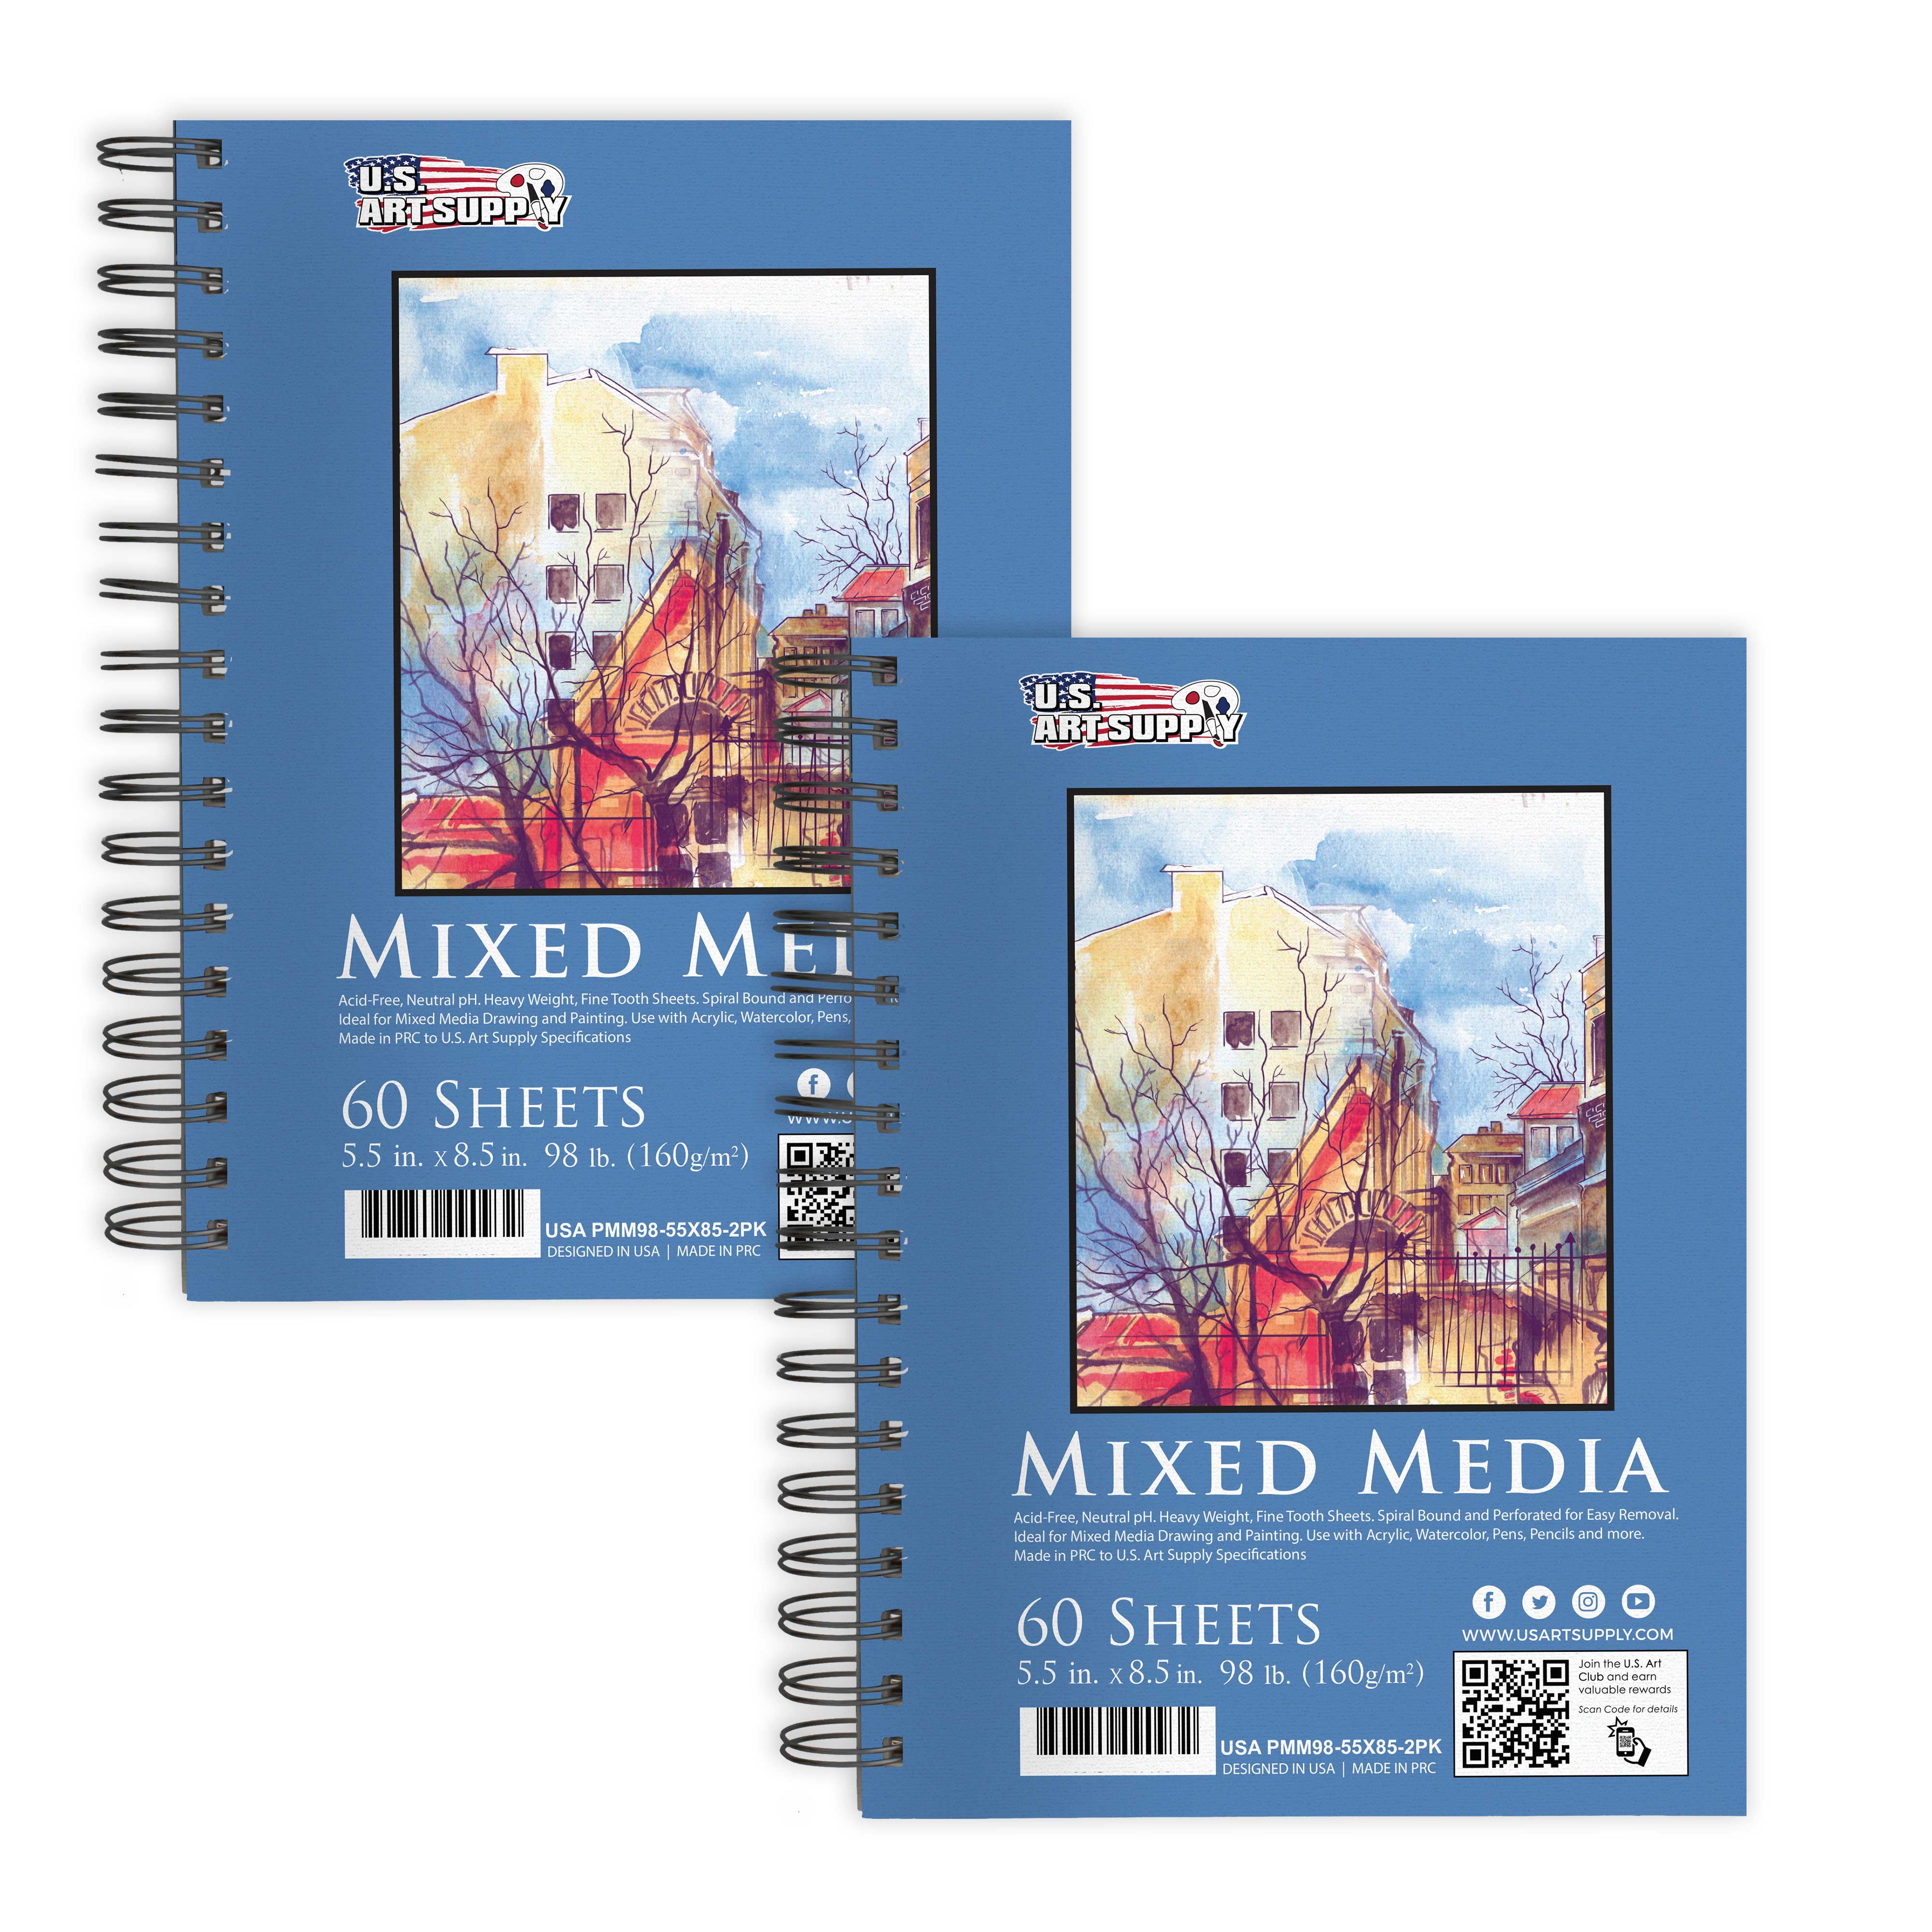  Bianyo Mixed Media Paper Sketchbook, A4 (8.26 X 11.69), 60  Sheets/Each, 123 LB/200 GSM, Pack of 2 Pads, Spiral-Bound Pad, Ideal for  Wet & Dry Media Like Marker, Watercolor, Acrylic, Pastel